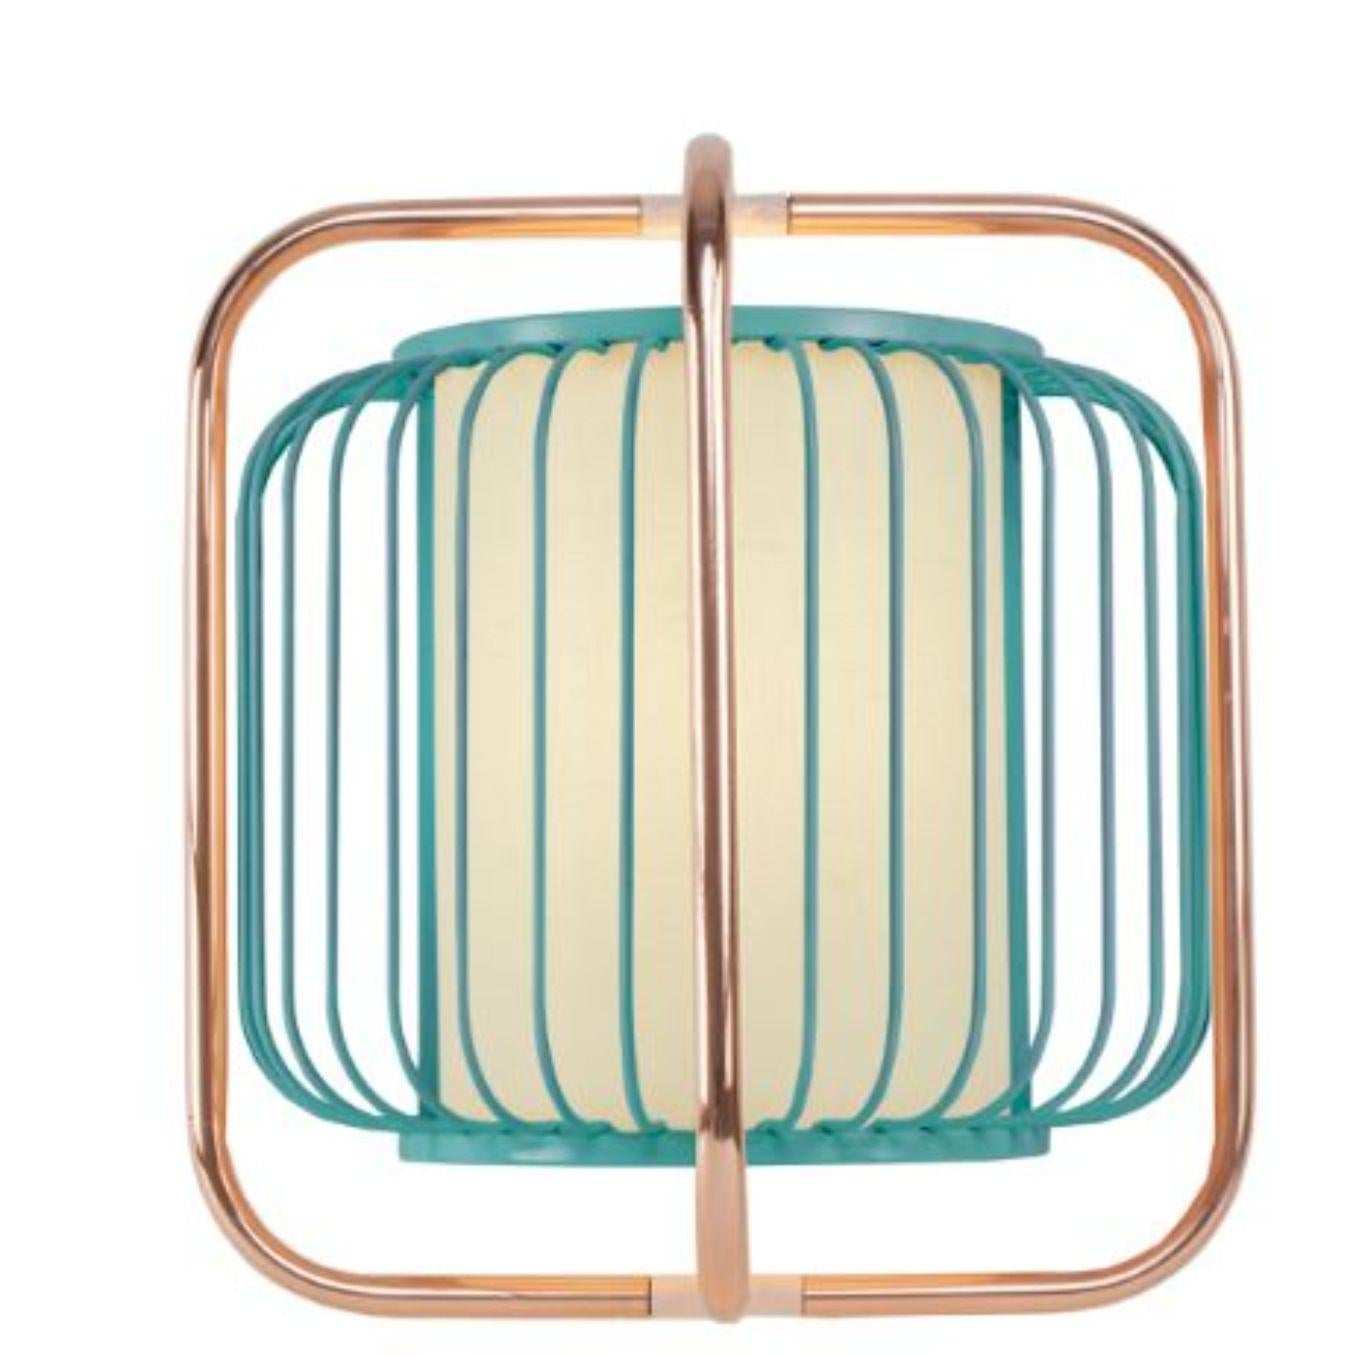 Copper and mint jules wall lamp by Dooq.
Dimensions: W 40 x D 23 x H 40 cm
Materials: lacquered metal, polished or brushed metal, copper.
Abat-jour: cotton
Also available in different colors and materials.

Information:
230V/50Hz
E14/1x15W